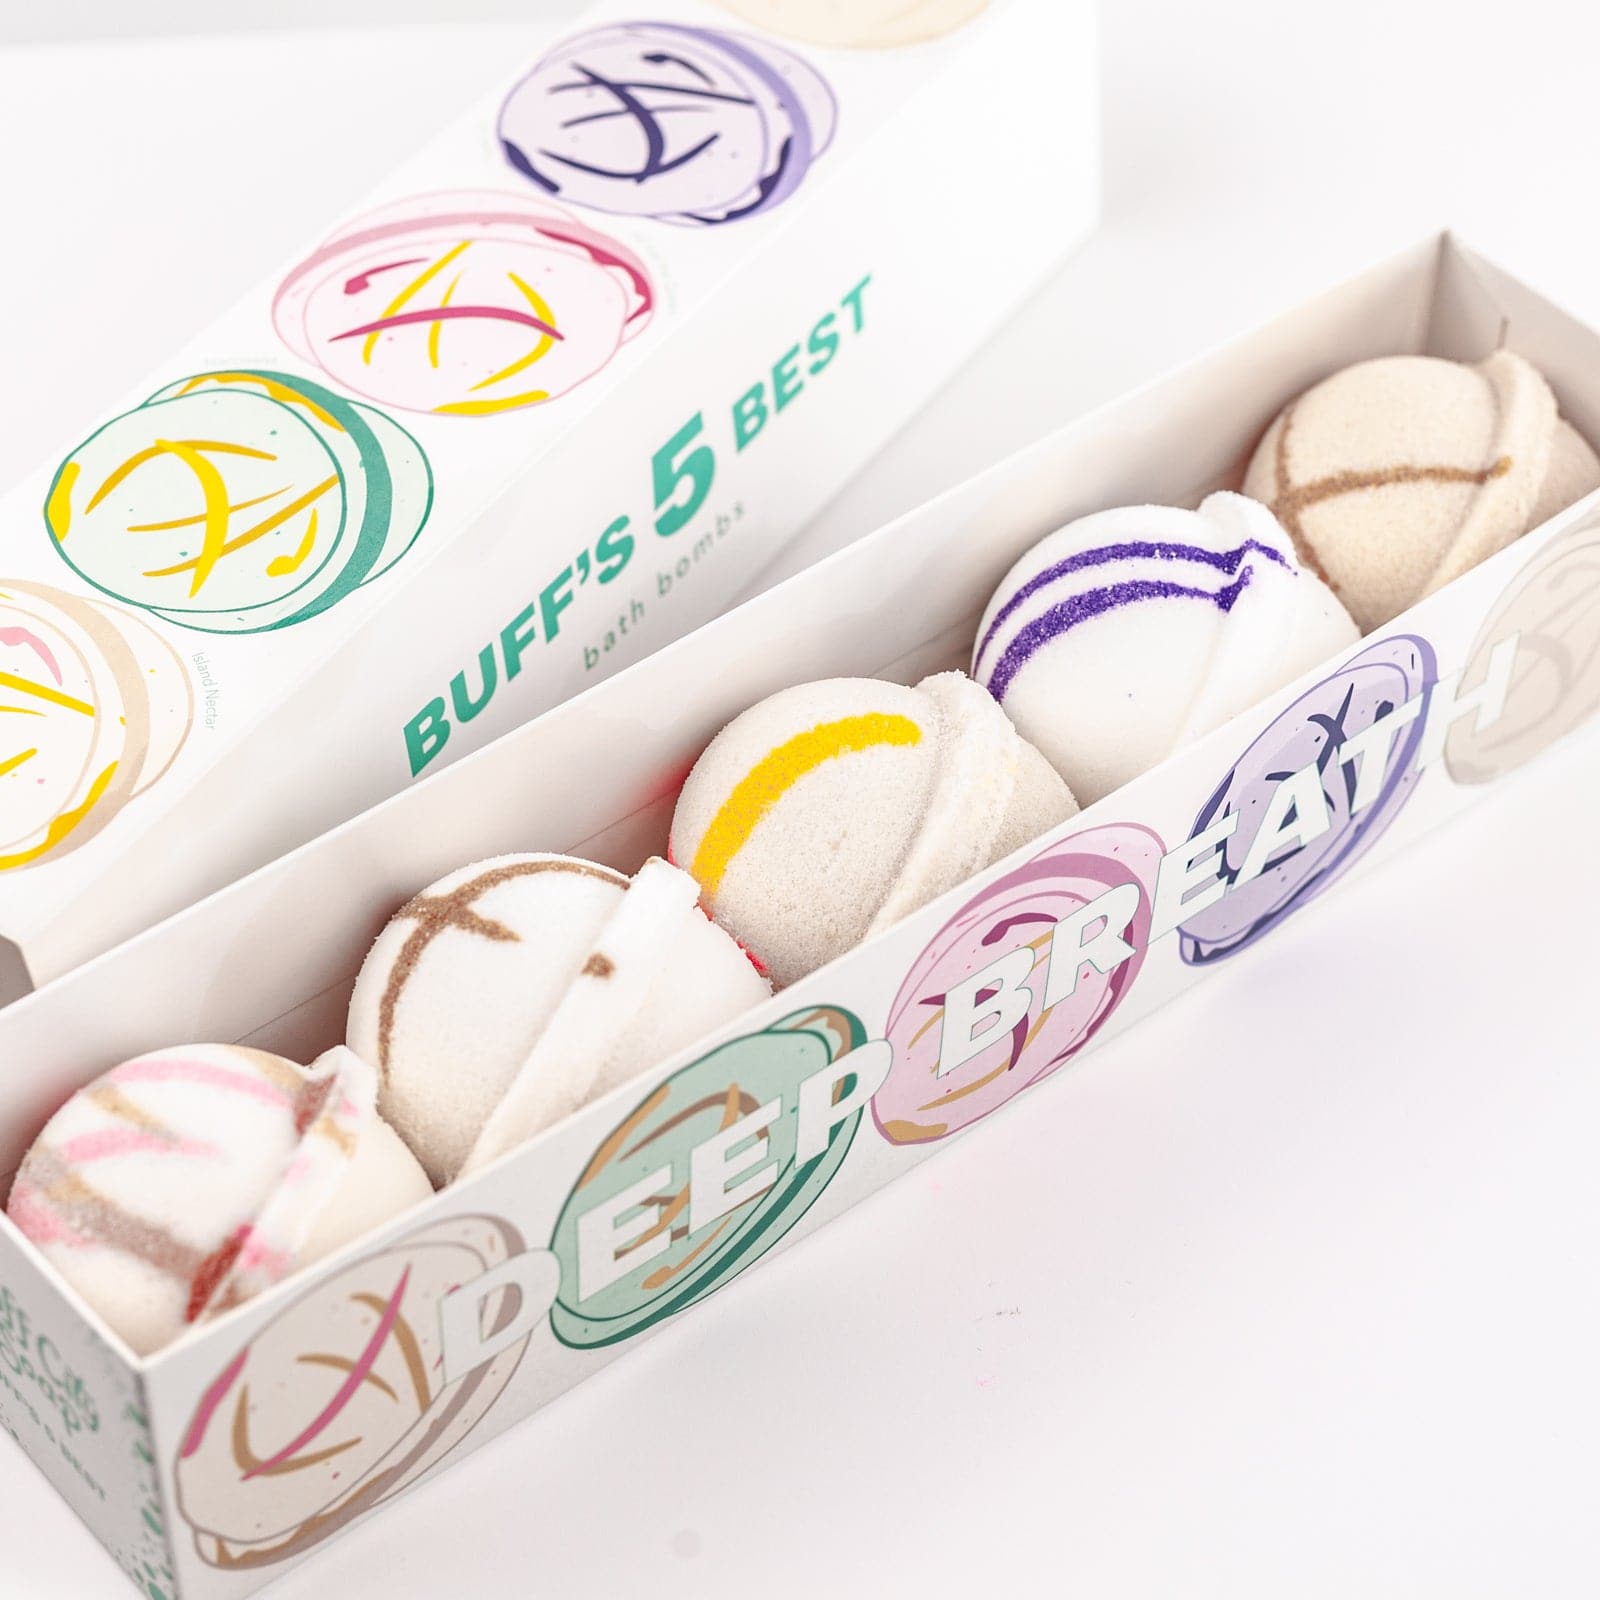 Five Bath Bombs sitting in packaging with varied designs of purple, yellow, brown and pink